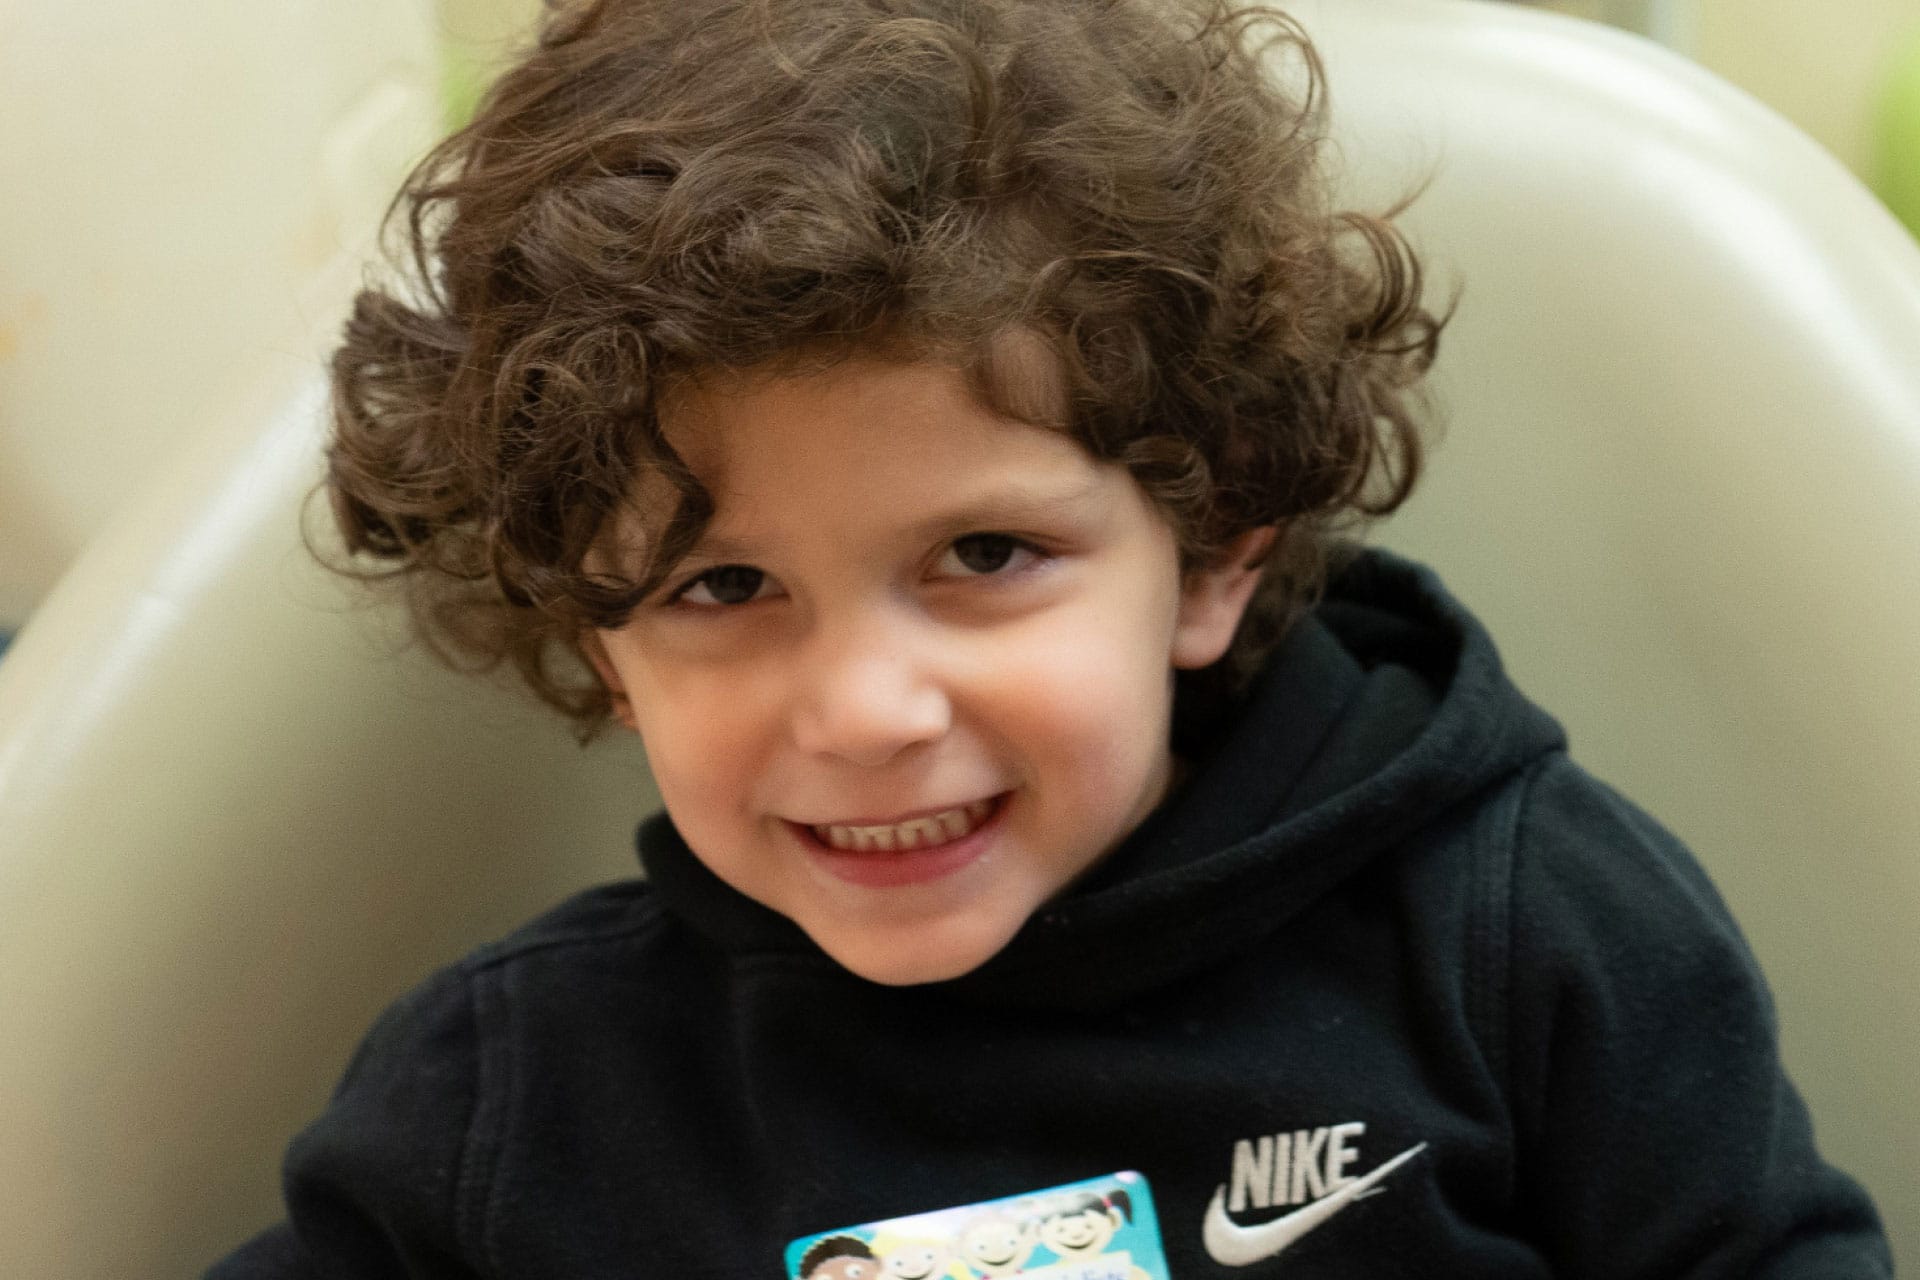 toddler boy with curly hair smiling at camera